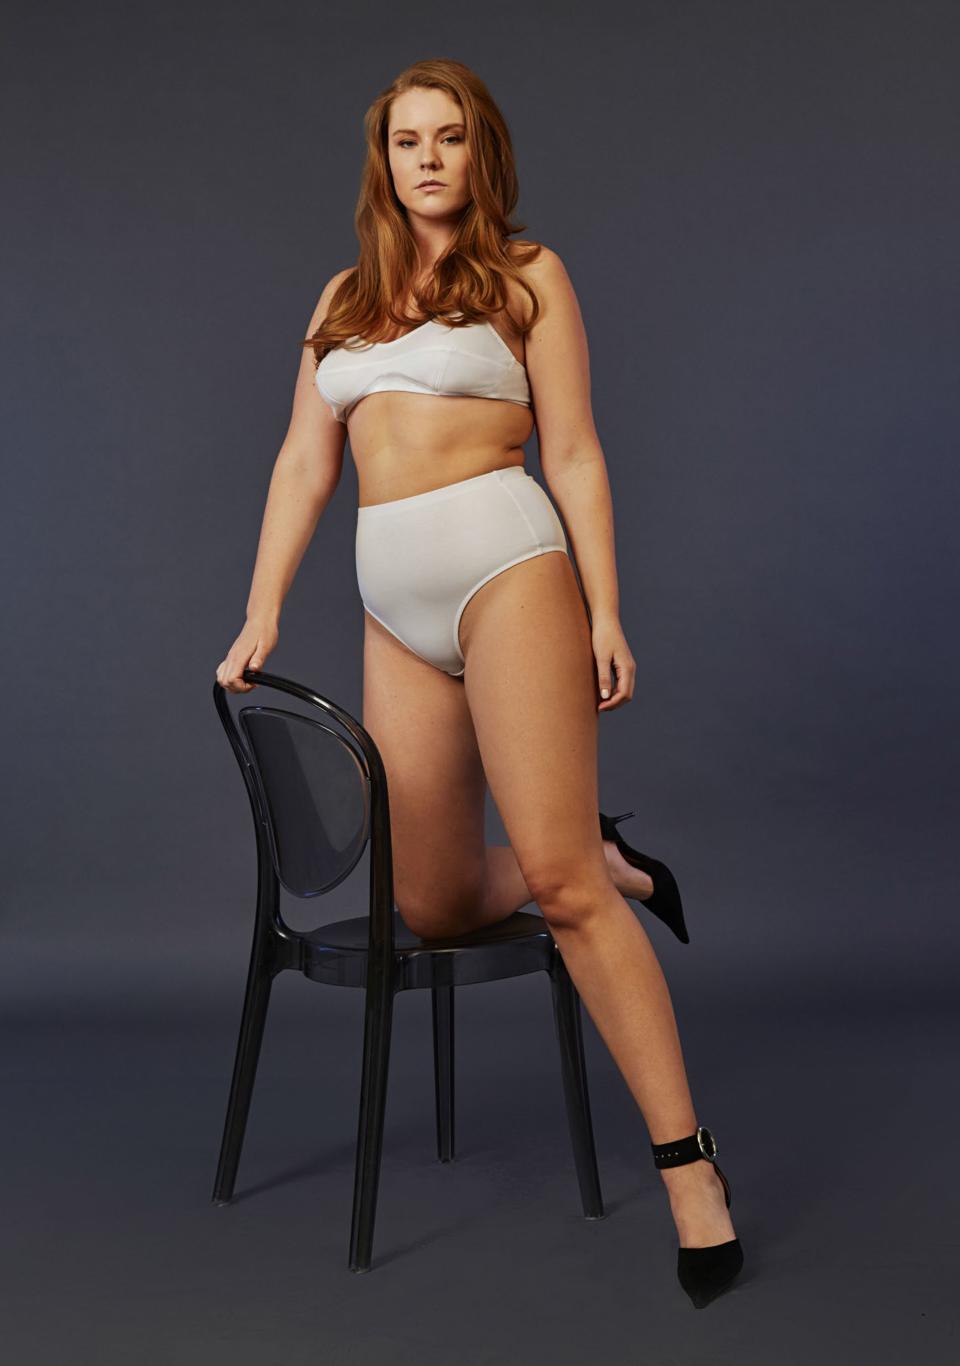 Two anonymous women are redefining Russia’s constricting underwear market with the body-friendly label Irma.